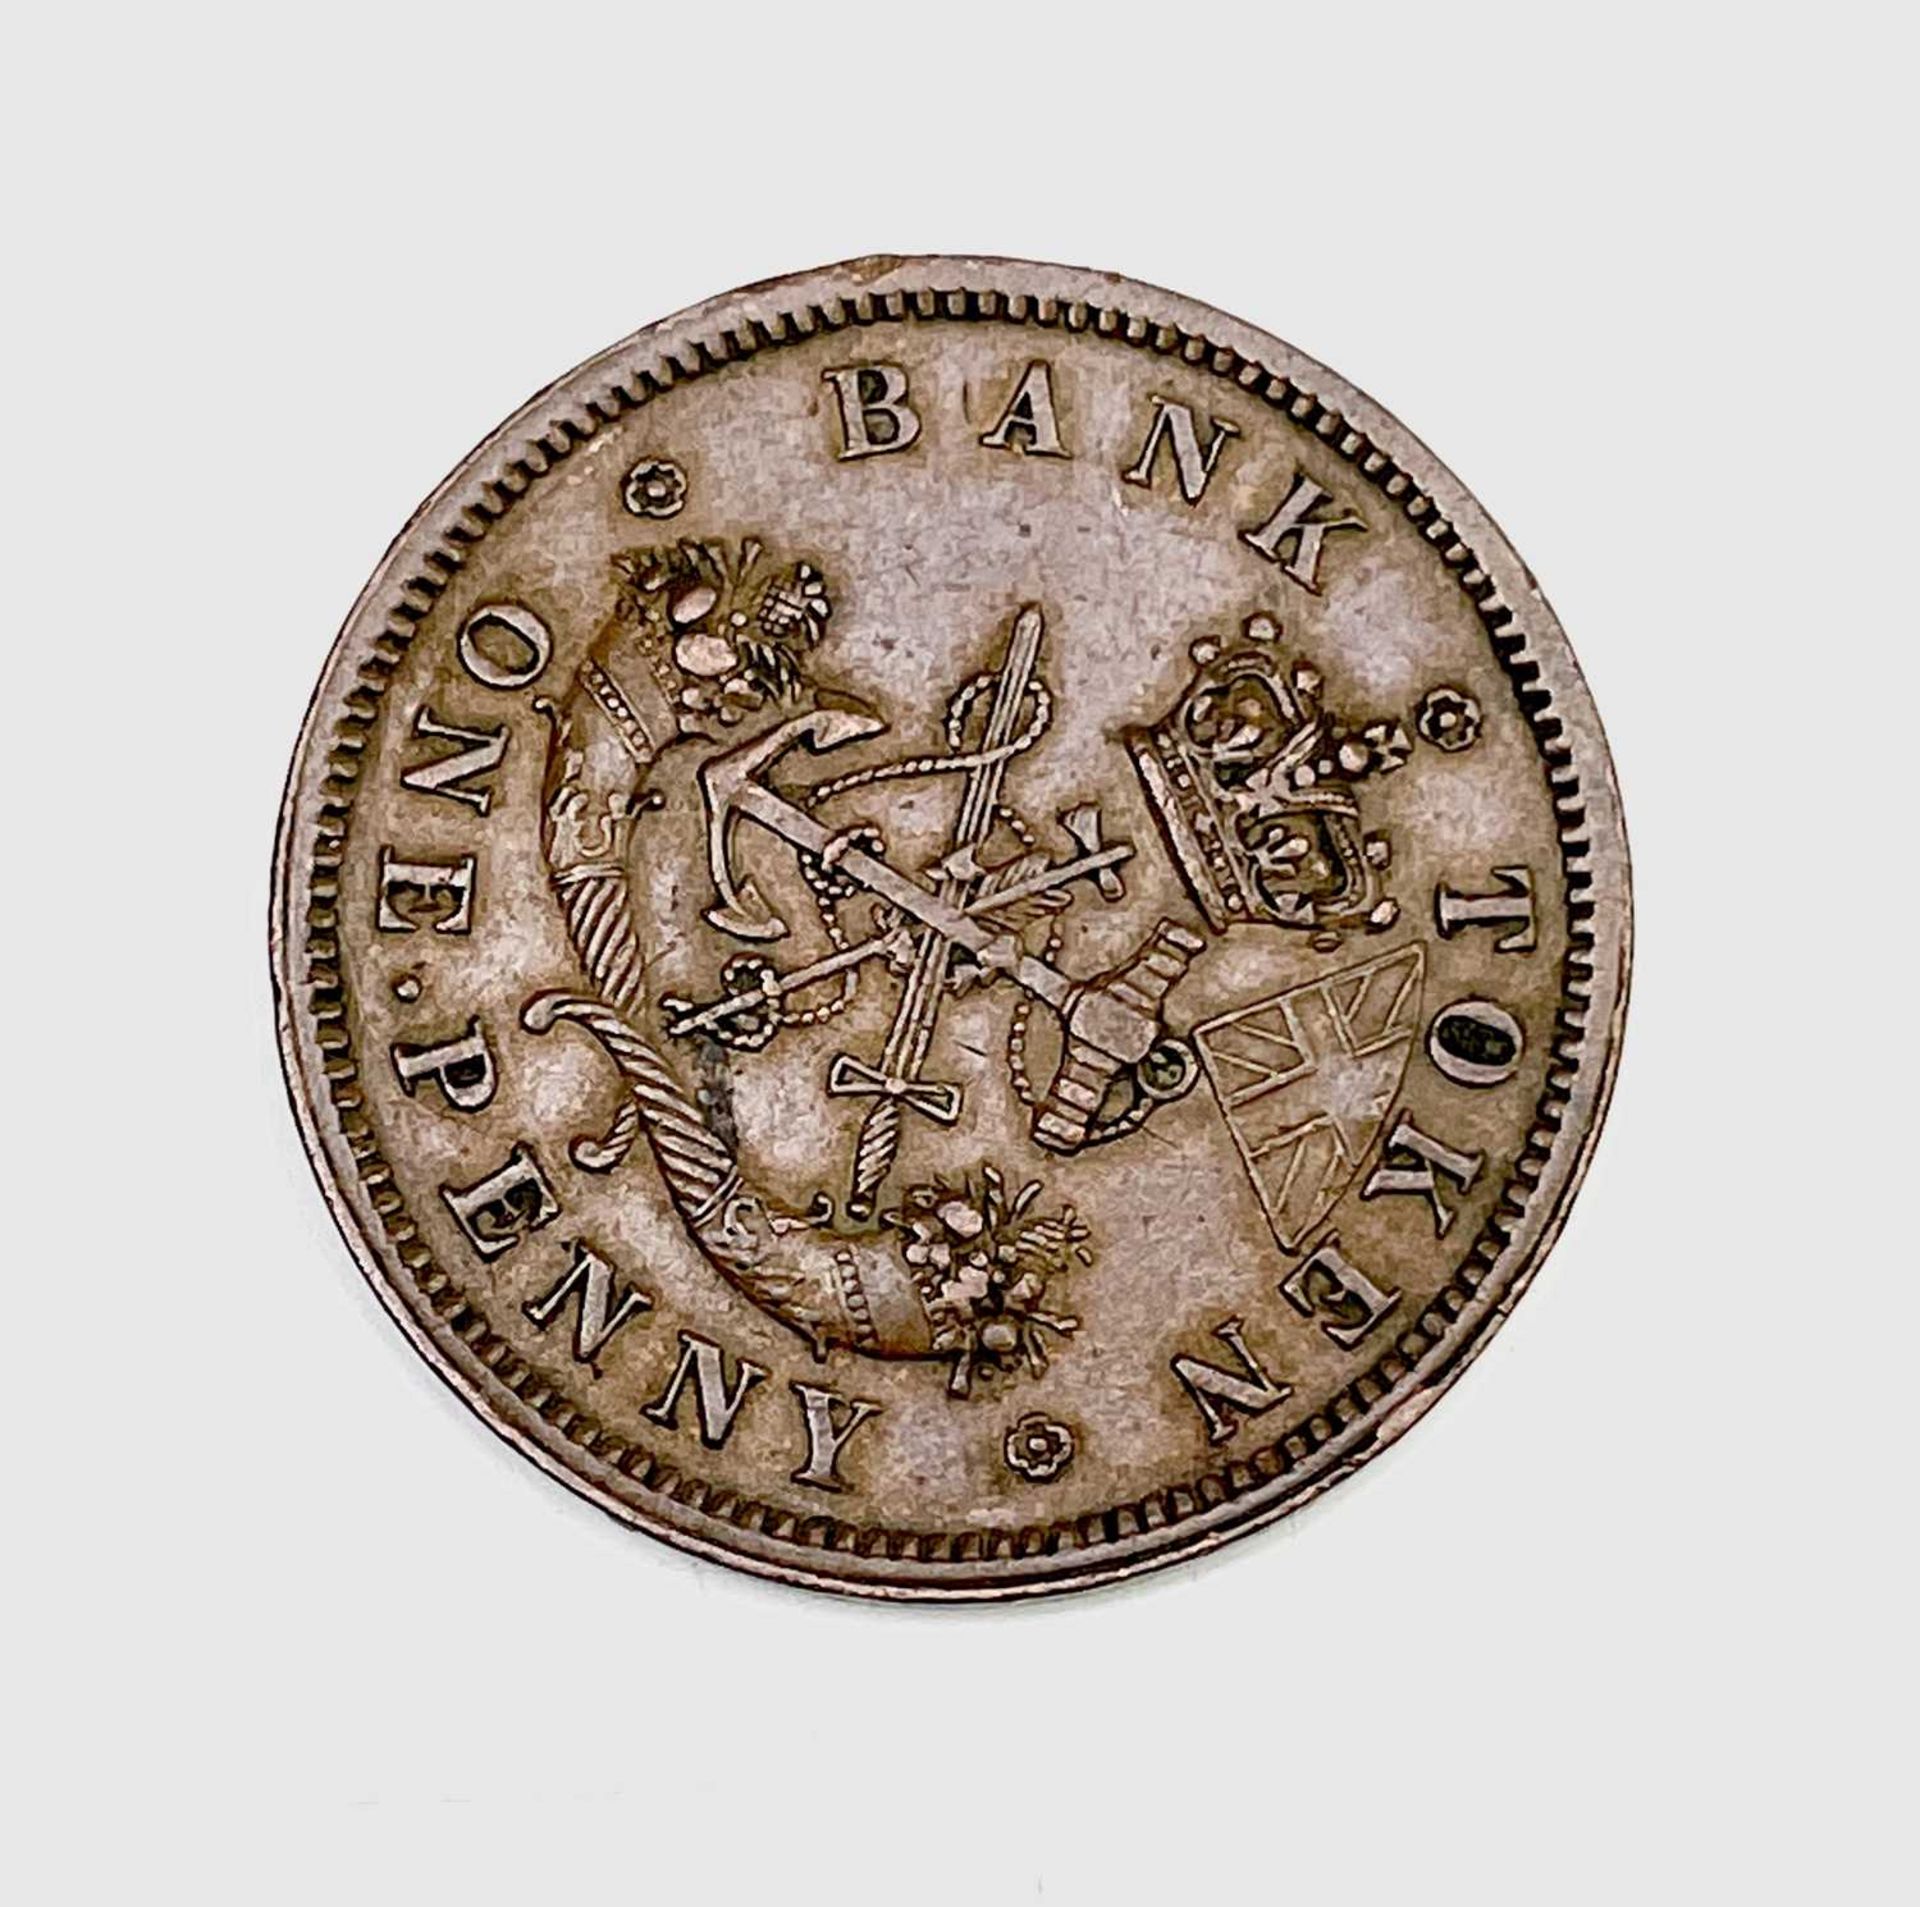 Coins & Banknotes. Lot comprises a Bank of Upper Canada 1857 Bank Token penny in EF condition, - Image 7 of 8